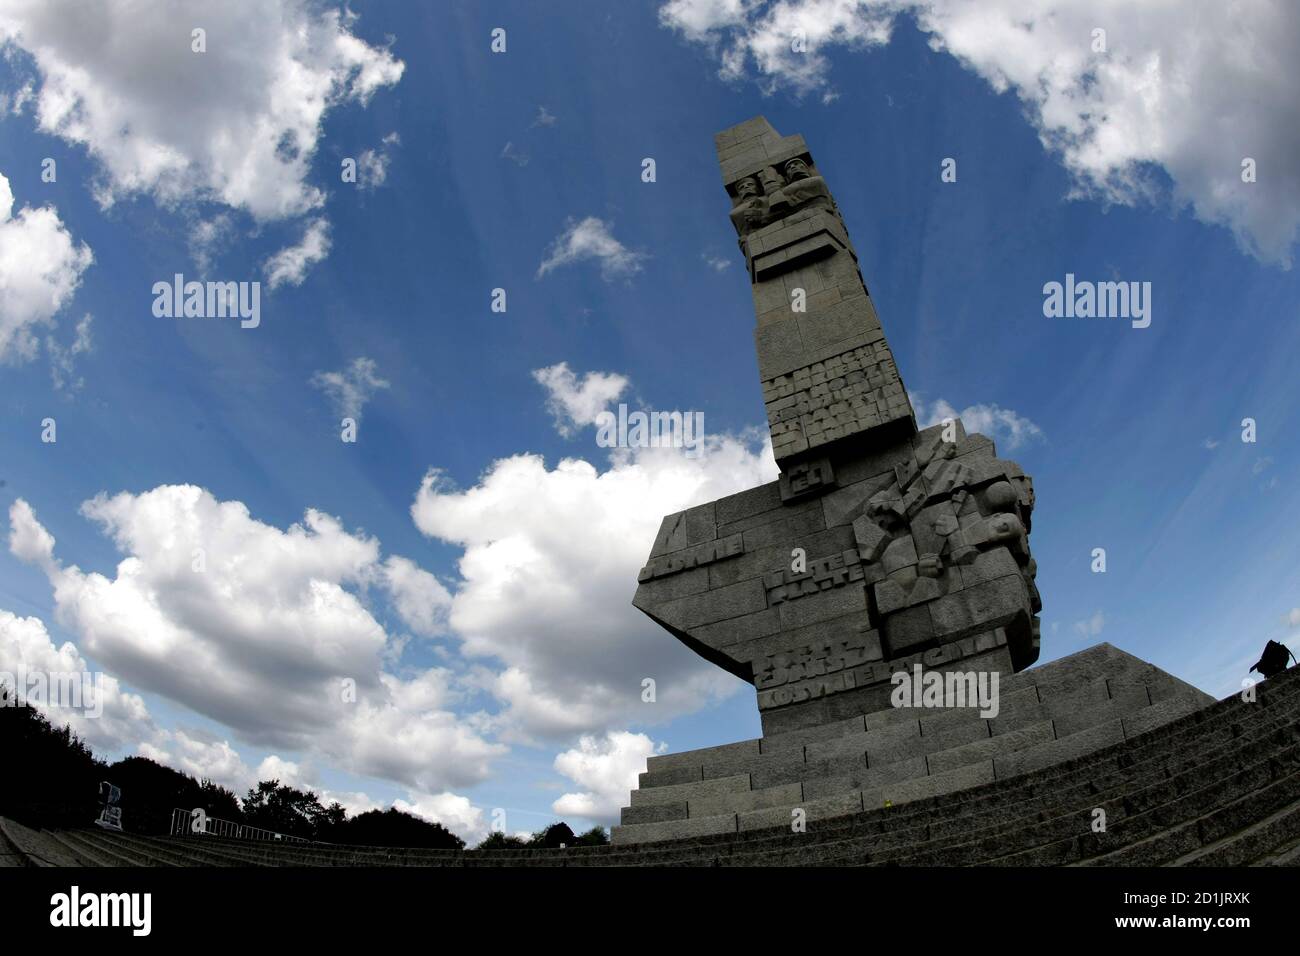 A general view of a monument at Westerplatte, outside of Gdansk August 31, 2009. European leaders will commemorate on Tuesday the 70th anniversary of the outbreak of World War Two at ceremonies in Poland already clouded by disputes over historic responsibility that pit Russia against the West. Russian Prime Minister Vladimir Putin's speech in the Polish Baltic port of Gdansk will be keenly scrutinised by Poles, Balts and others irked by what they see as Moscow's attempts to whitewash Soviet dictator Josef Stalin's role 70 years ago. REUTERS/Peter Andrews (POLAND ANNIVERSARY POLITICS CONFLICT) Stock Photo